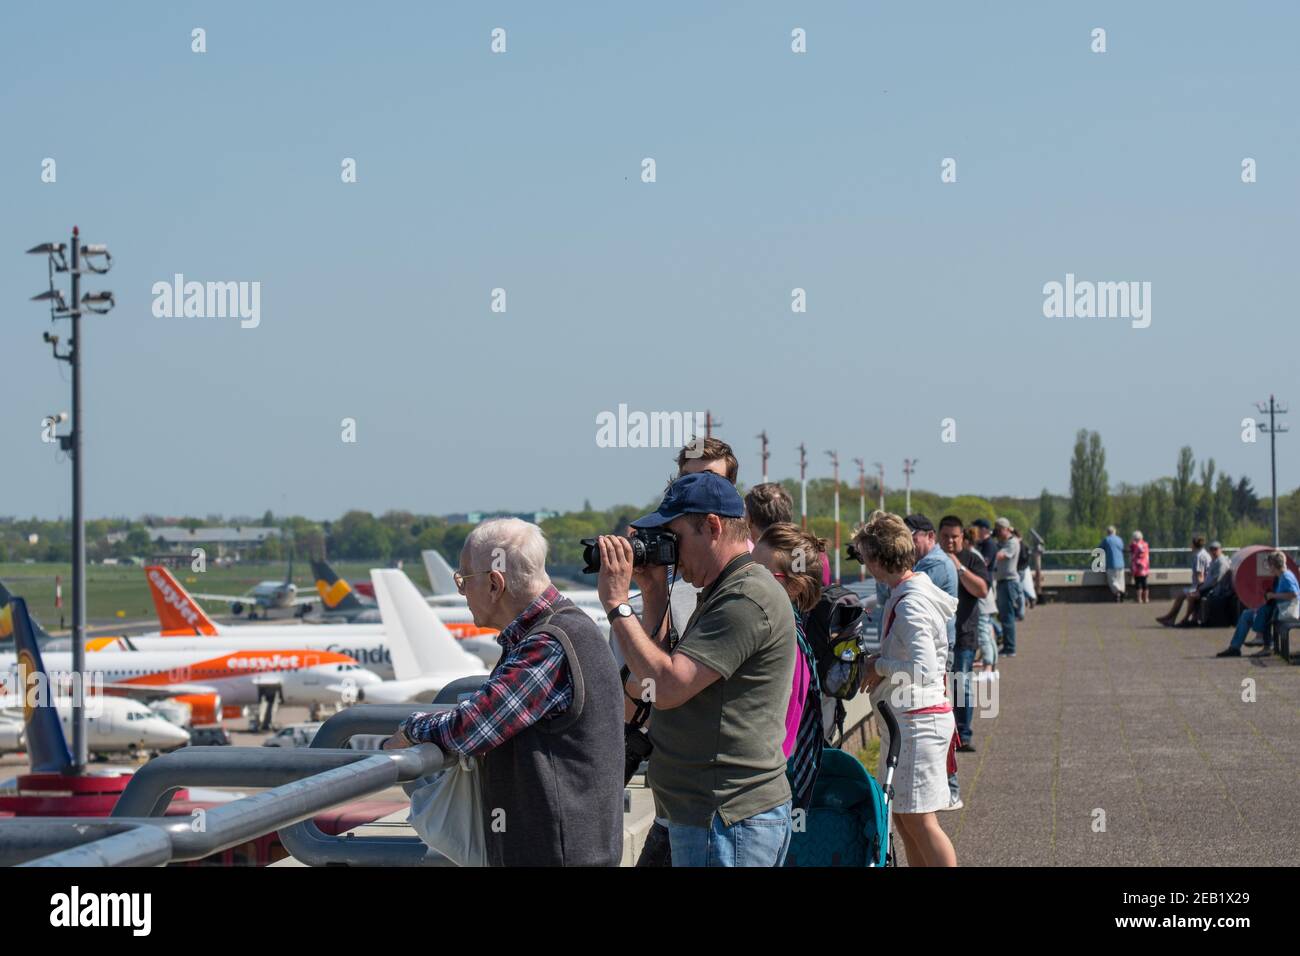 Berlin Germany - April 21. 2018: Berlin Germany - April 21. 2018: Airplane spotters looking at airplanes at the observations deck at Berlin Tegel airp Stock Photo